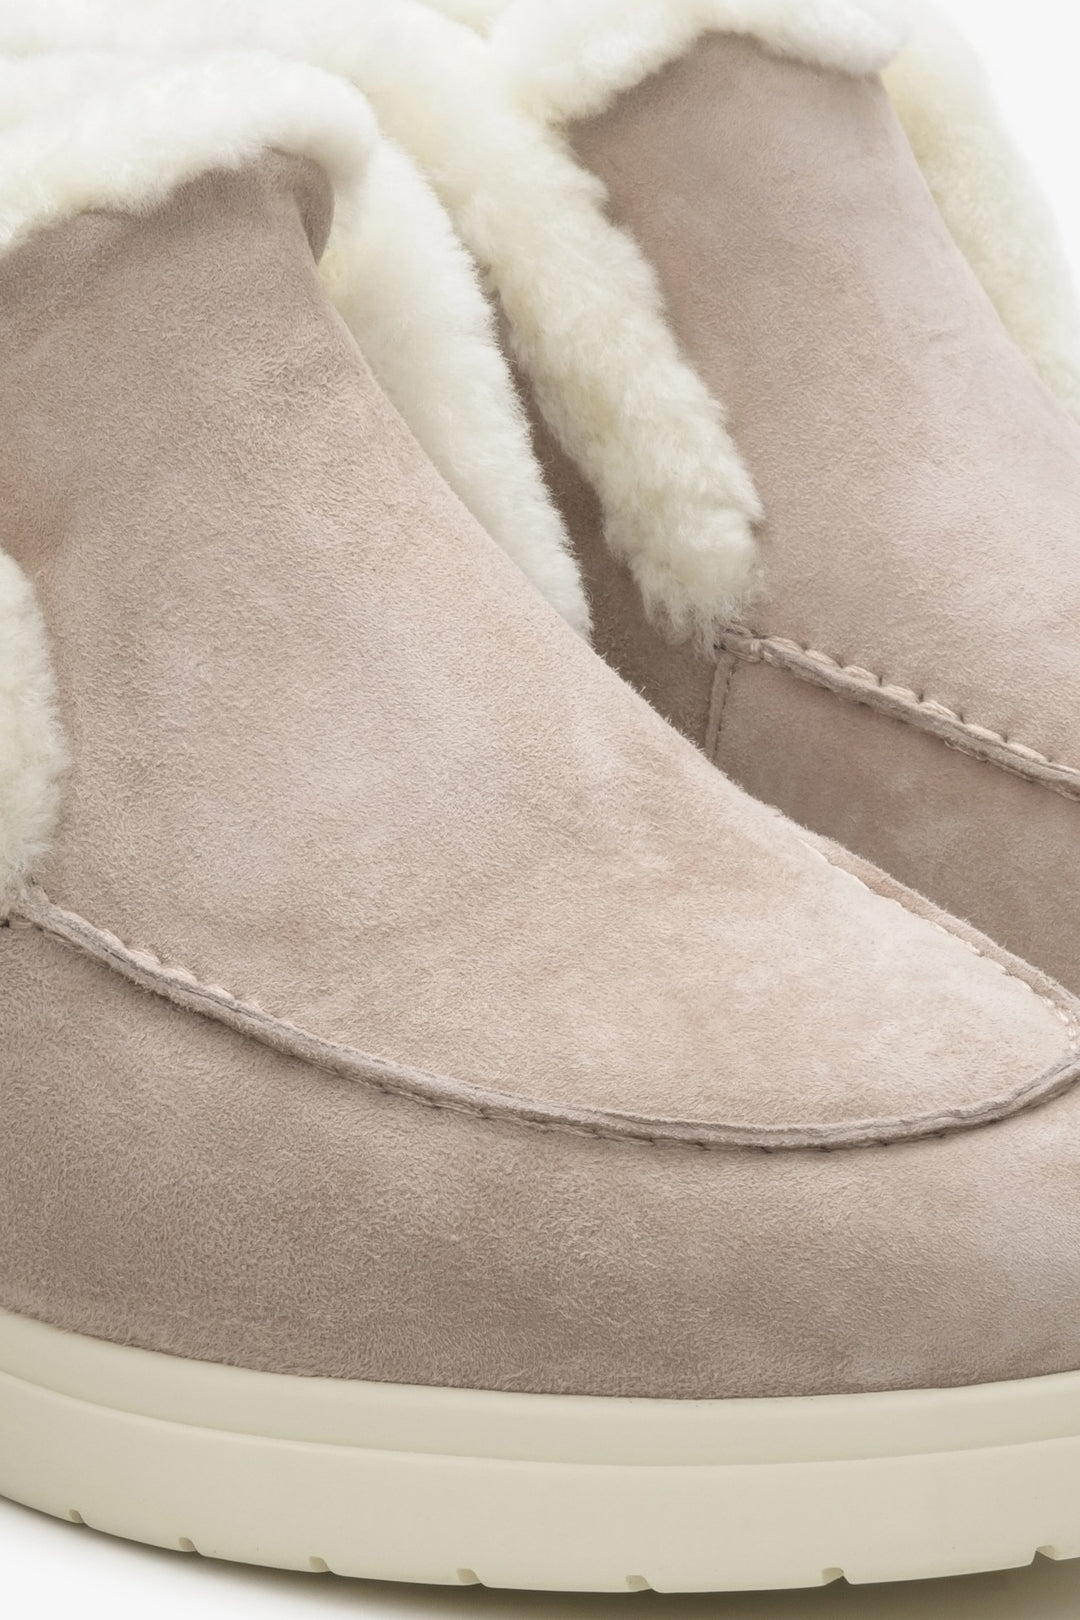 Women's fur and velour ankle boots in pale pink colour.